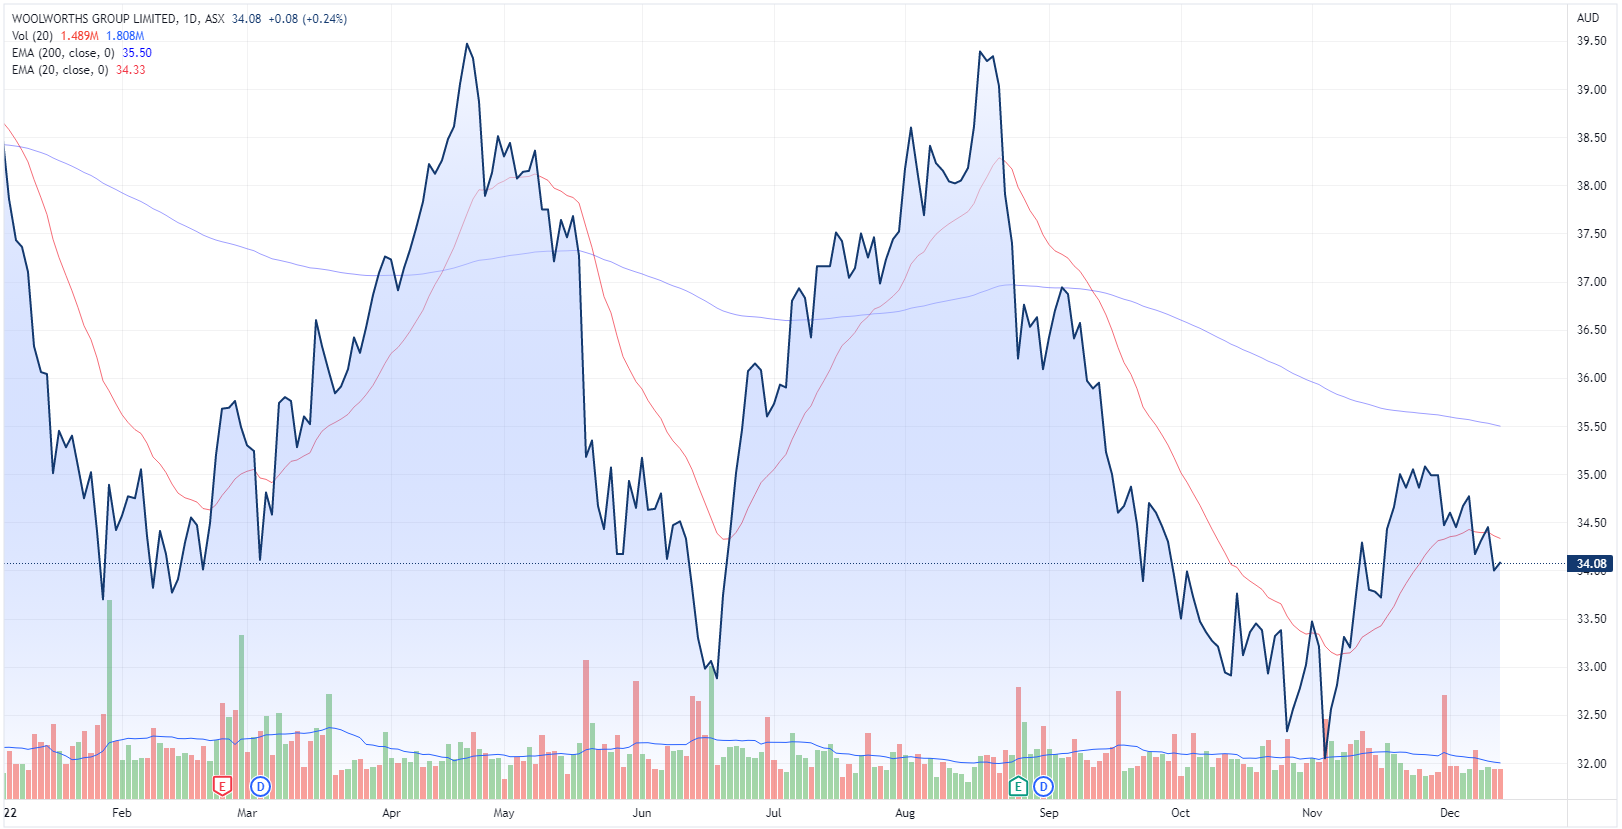 Woolworths share price chart